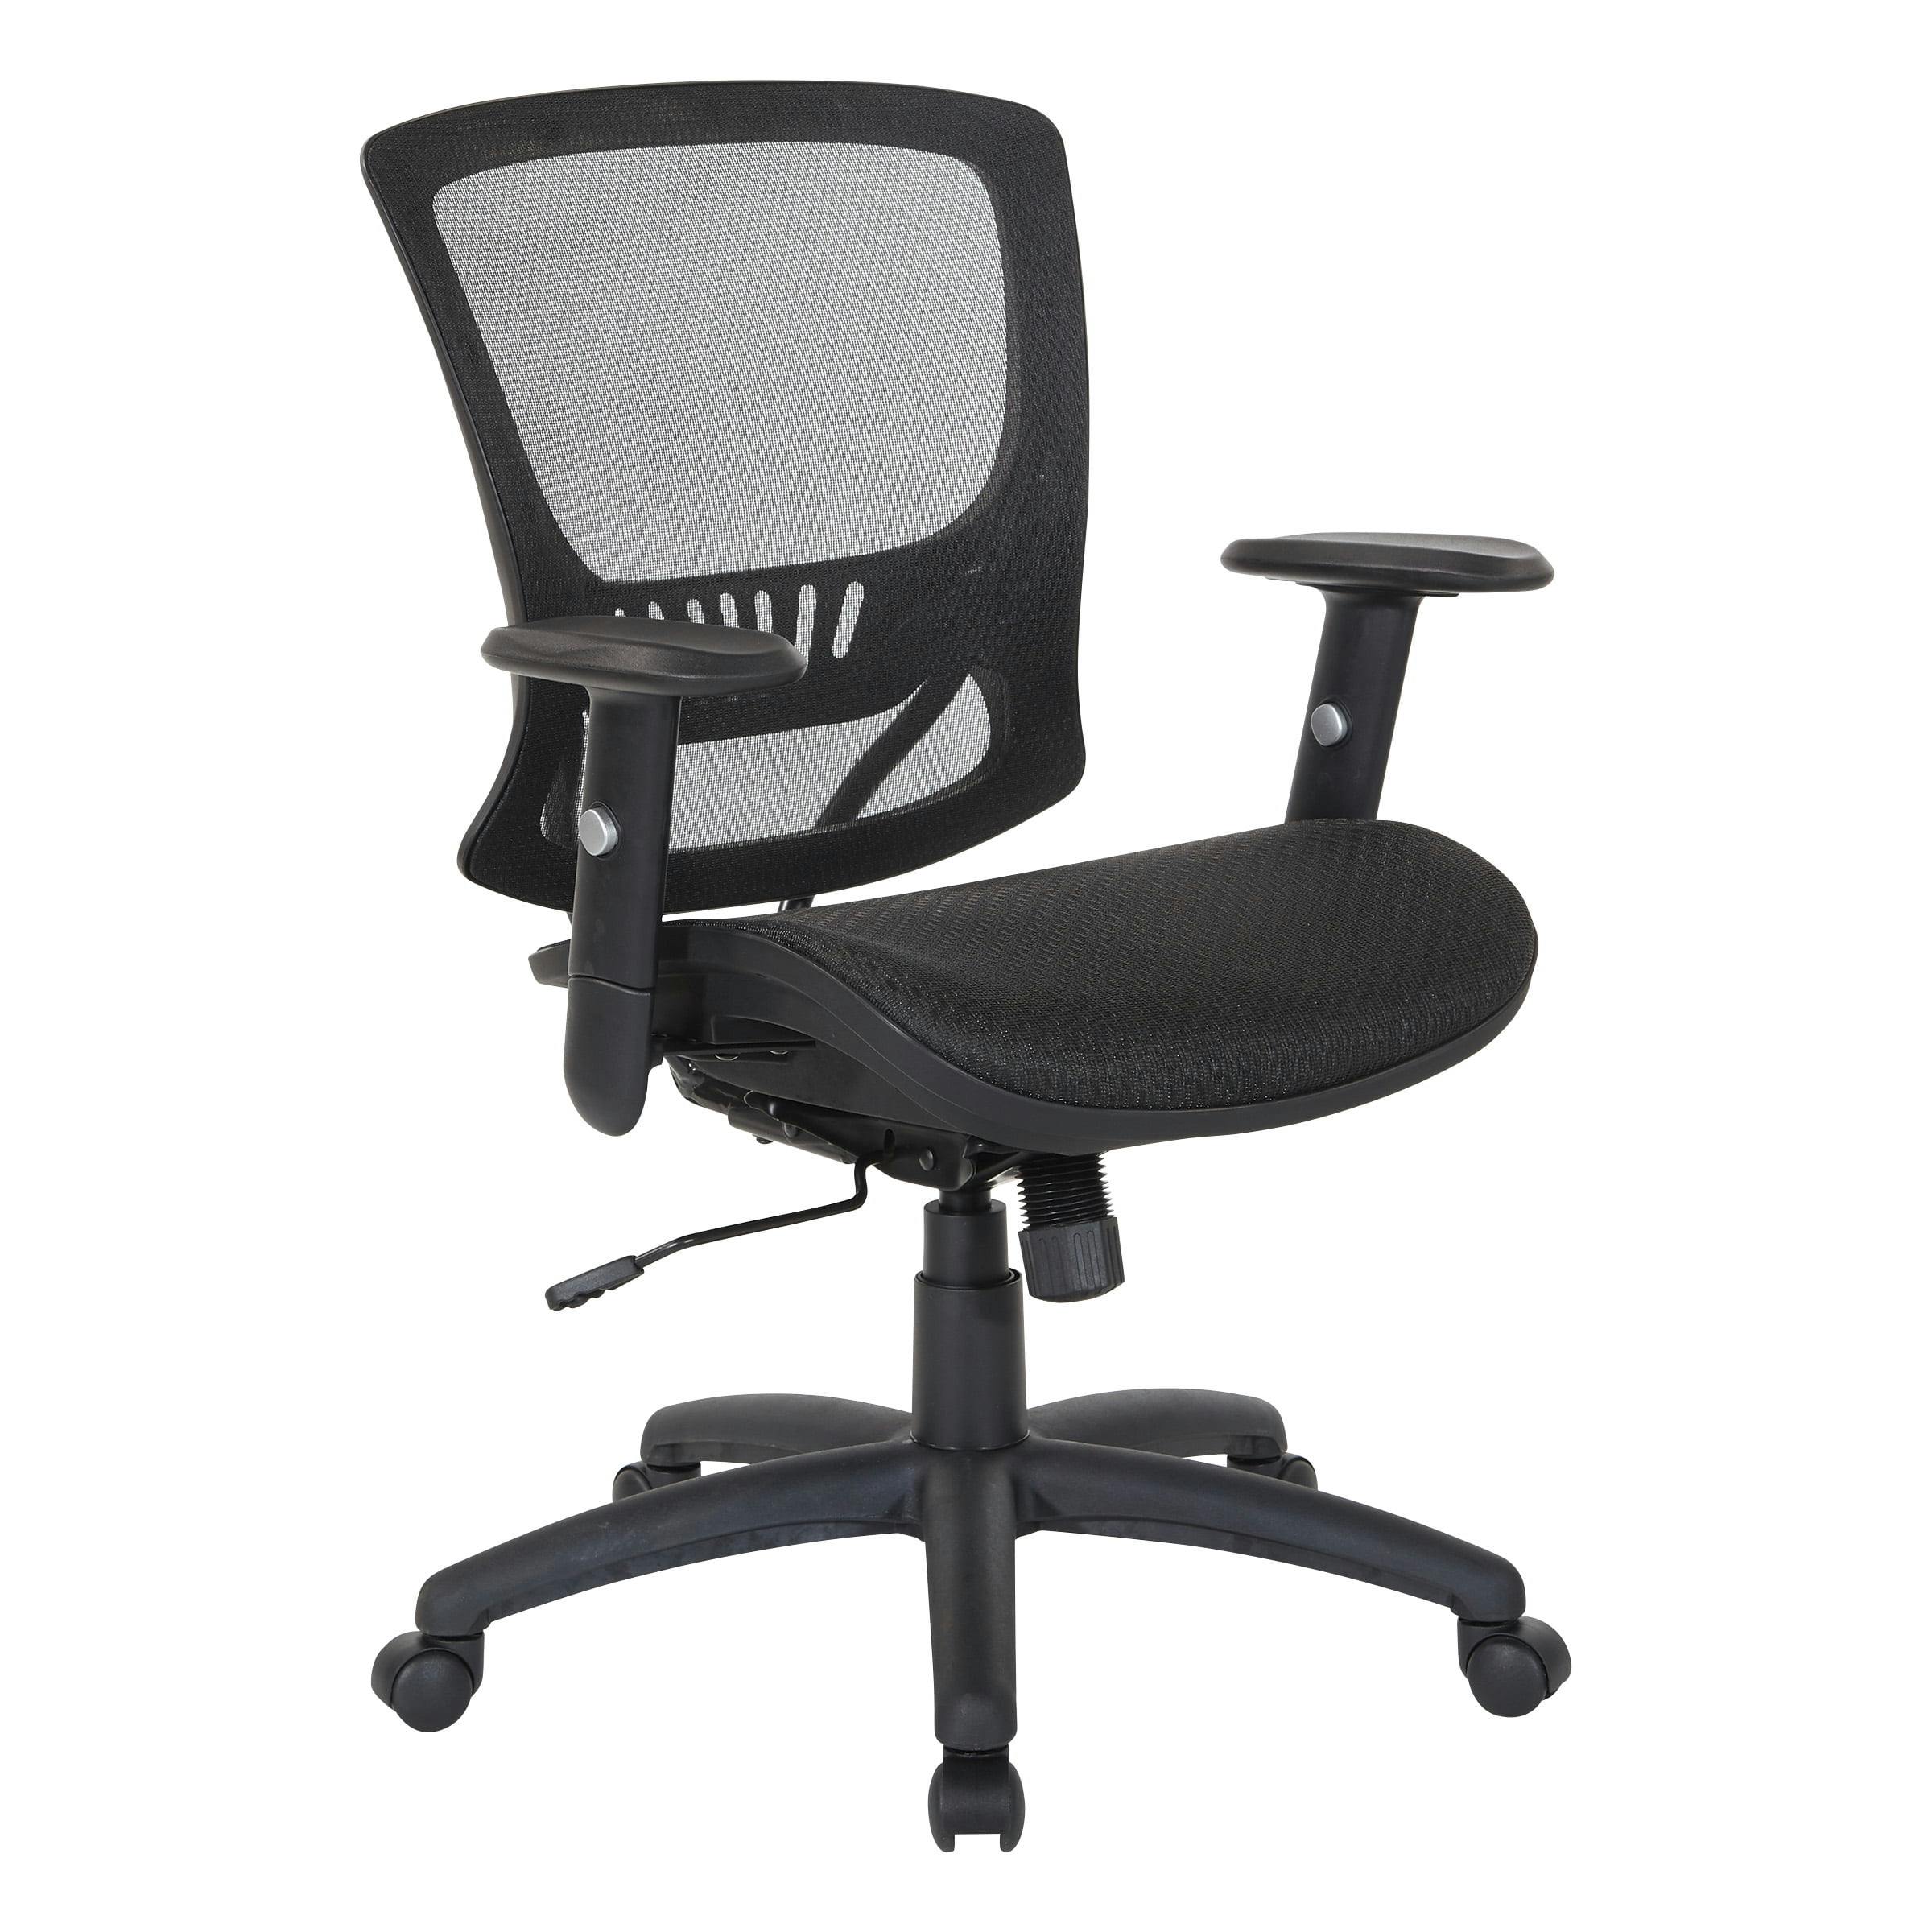 Executive Swivel Office Chair with Mesh Back in Black